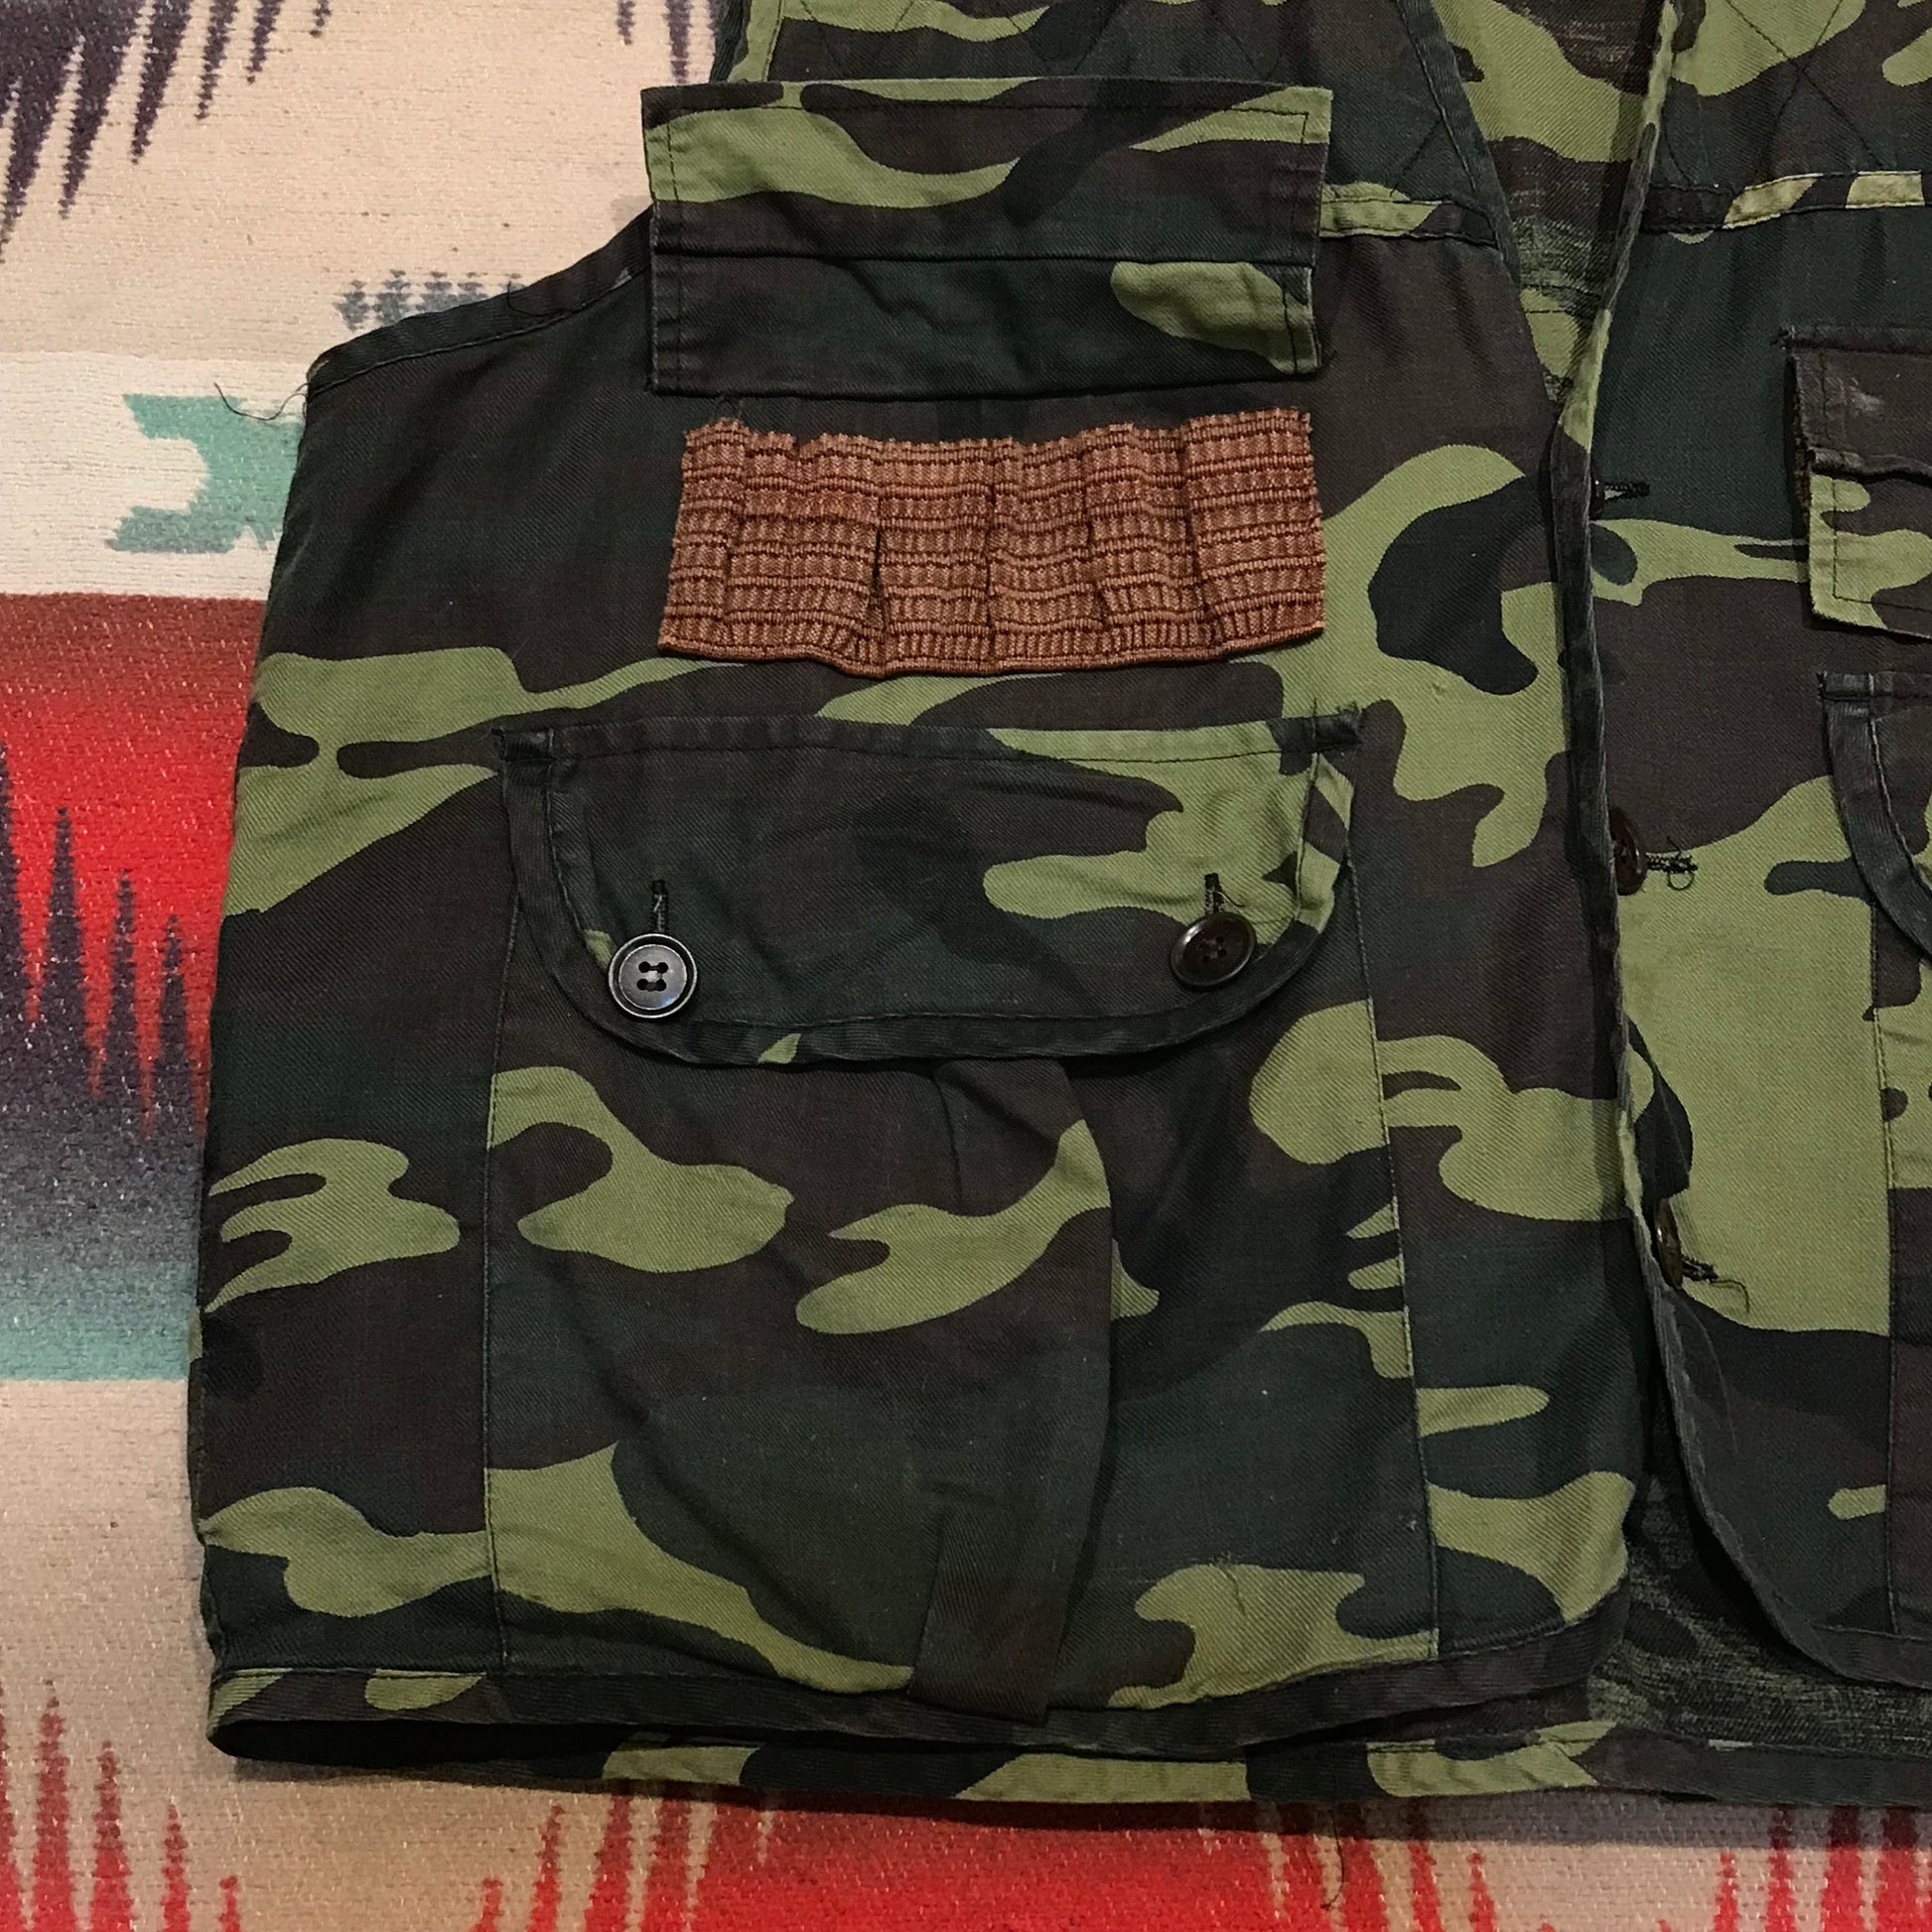 1980s/1990s Weather-Rite Camo Hunting Vest Size L/XL